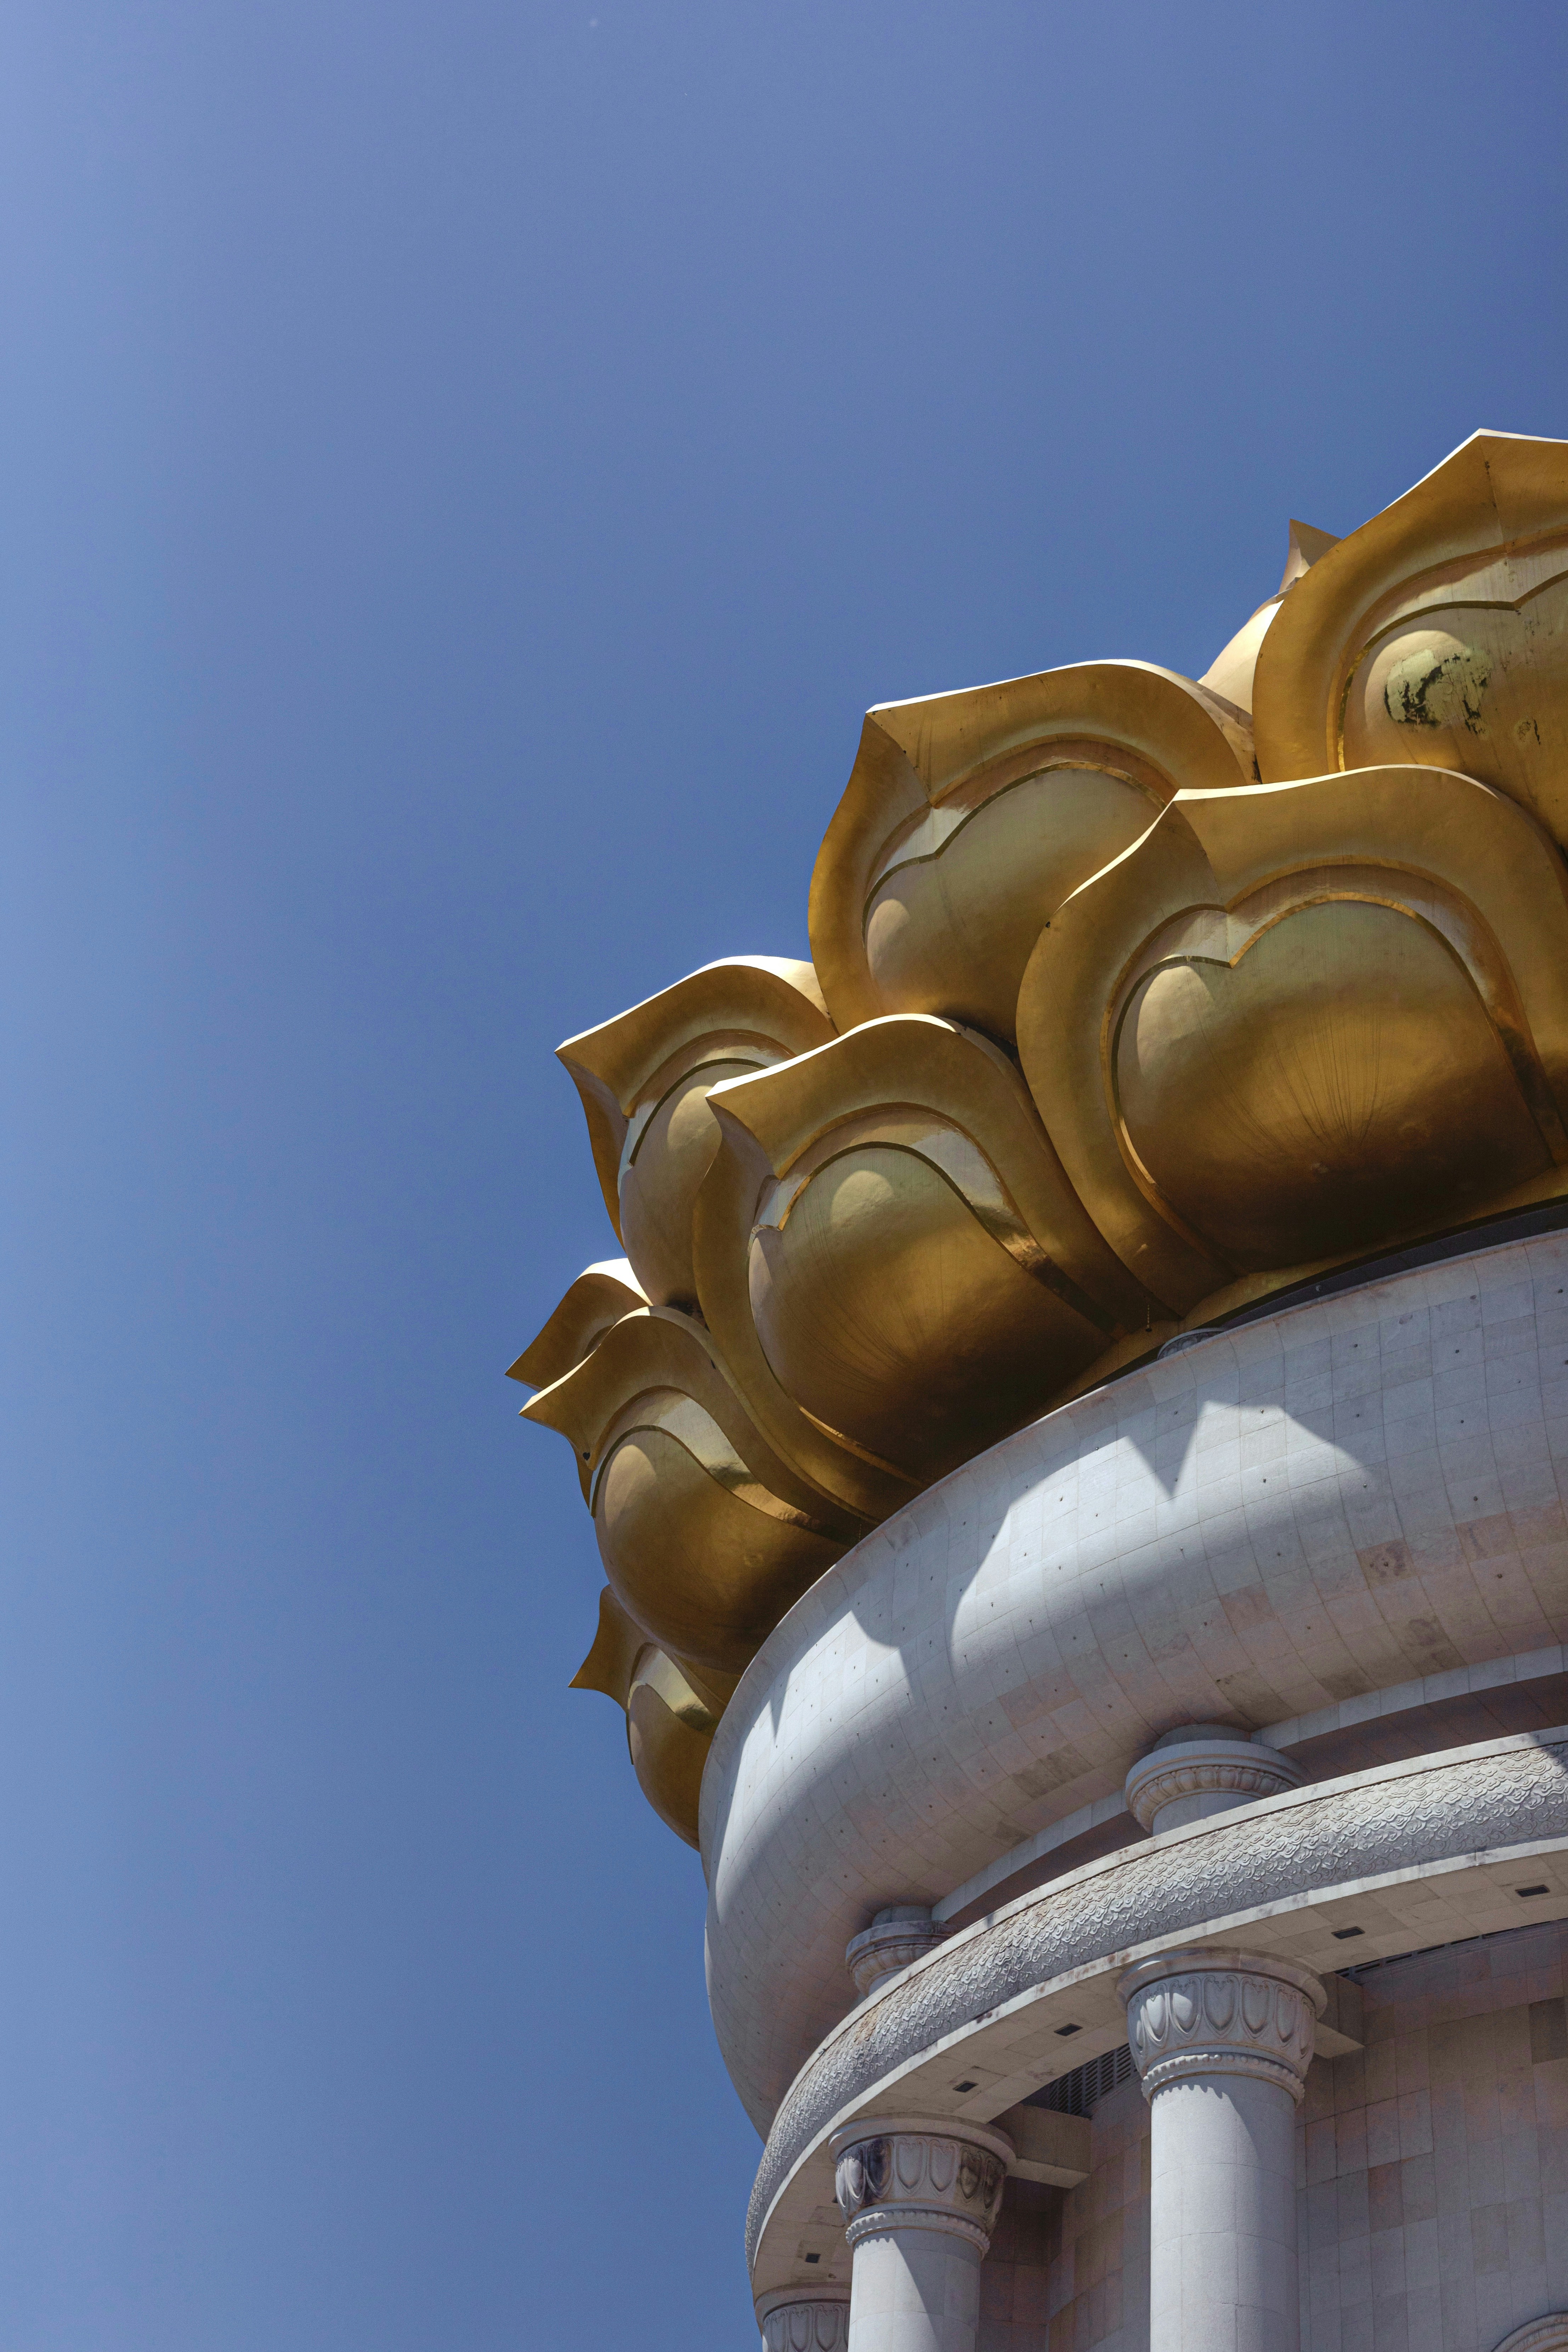 gold dragon statue under blue sky during daytime